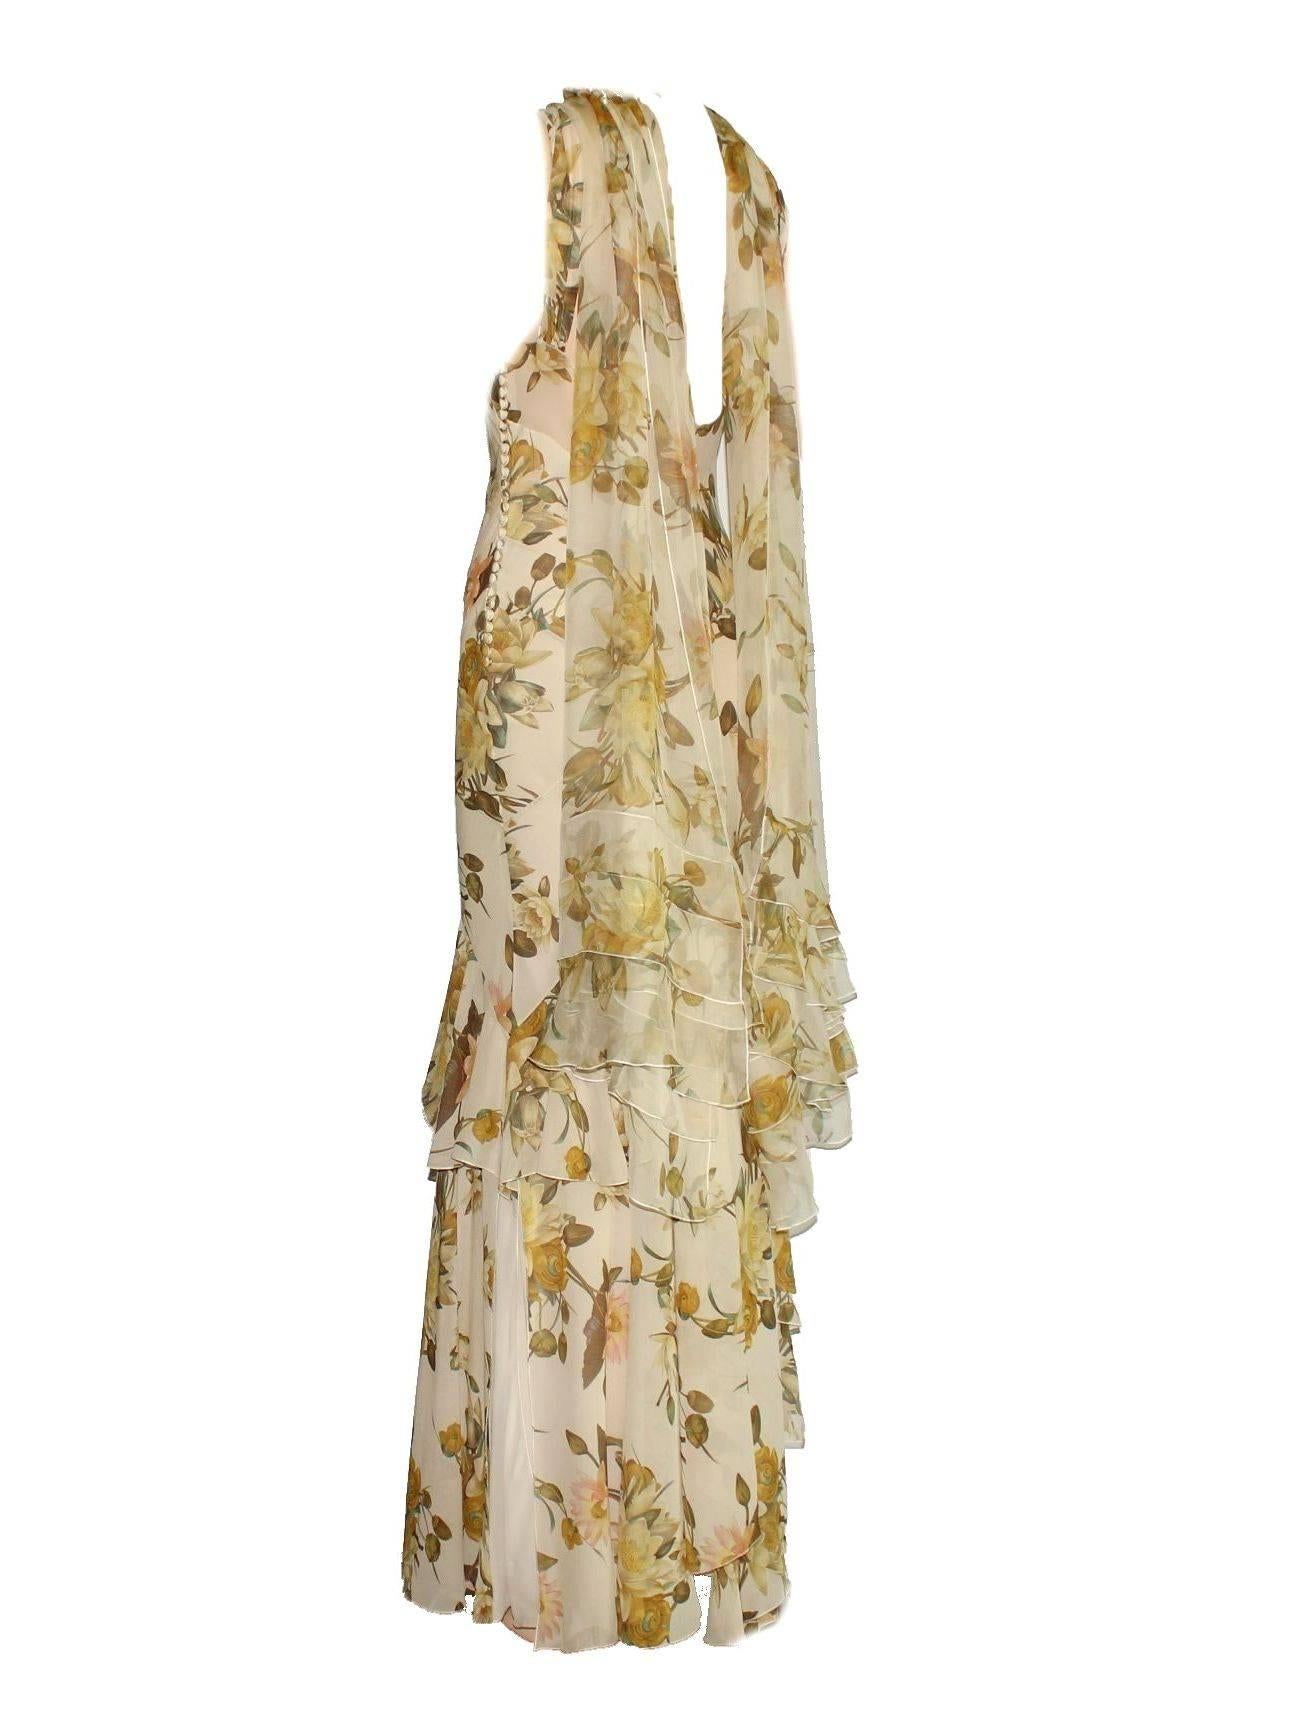 Women's Christian Dior Floral Silk Evening Dress Gown with Matching Silk Stola Shawl 